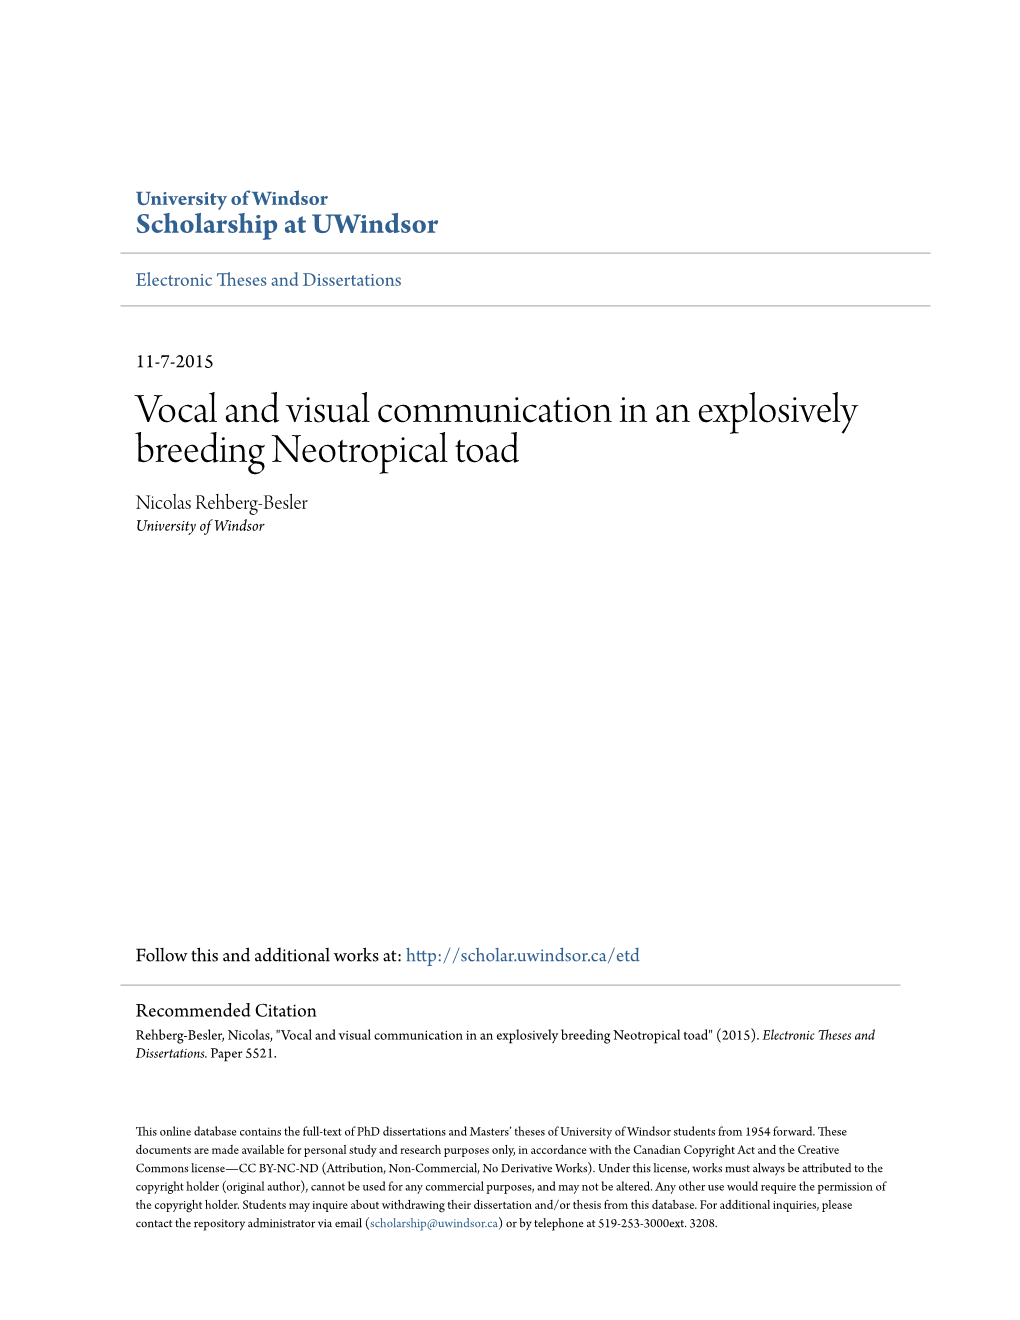 Vocal and Visual Communication in an Explosively Breeding Neotropical Toad Nicolas Rehberg-Besler University of Windsor